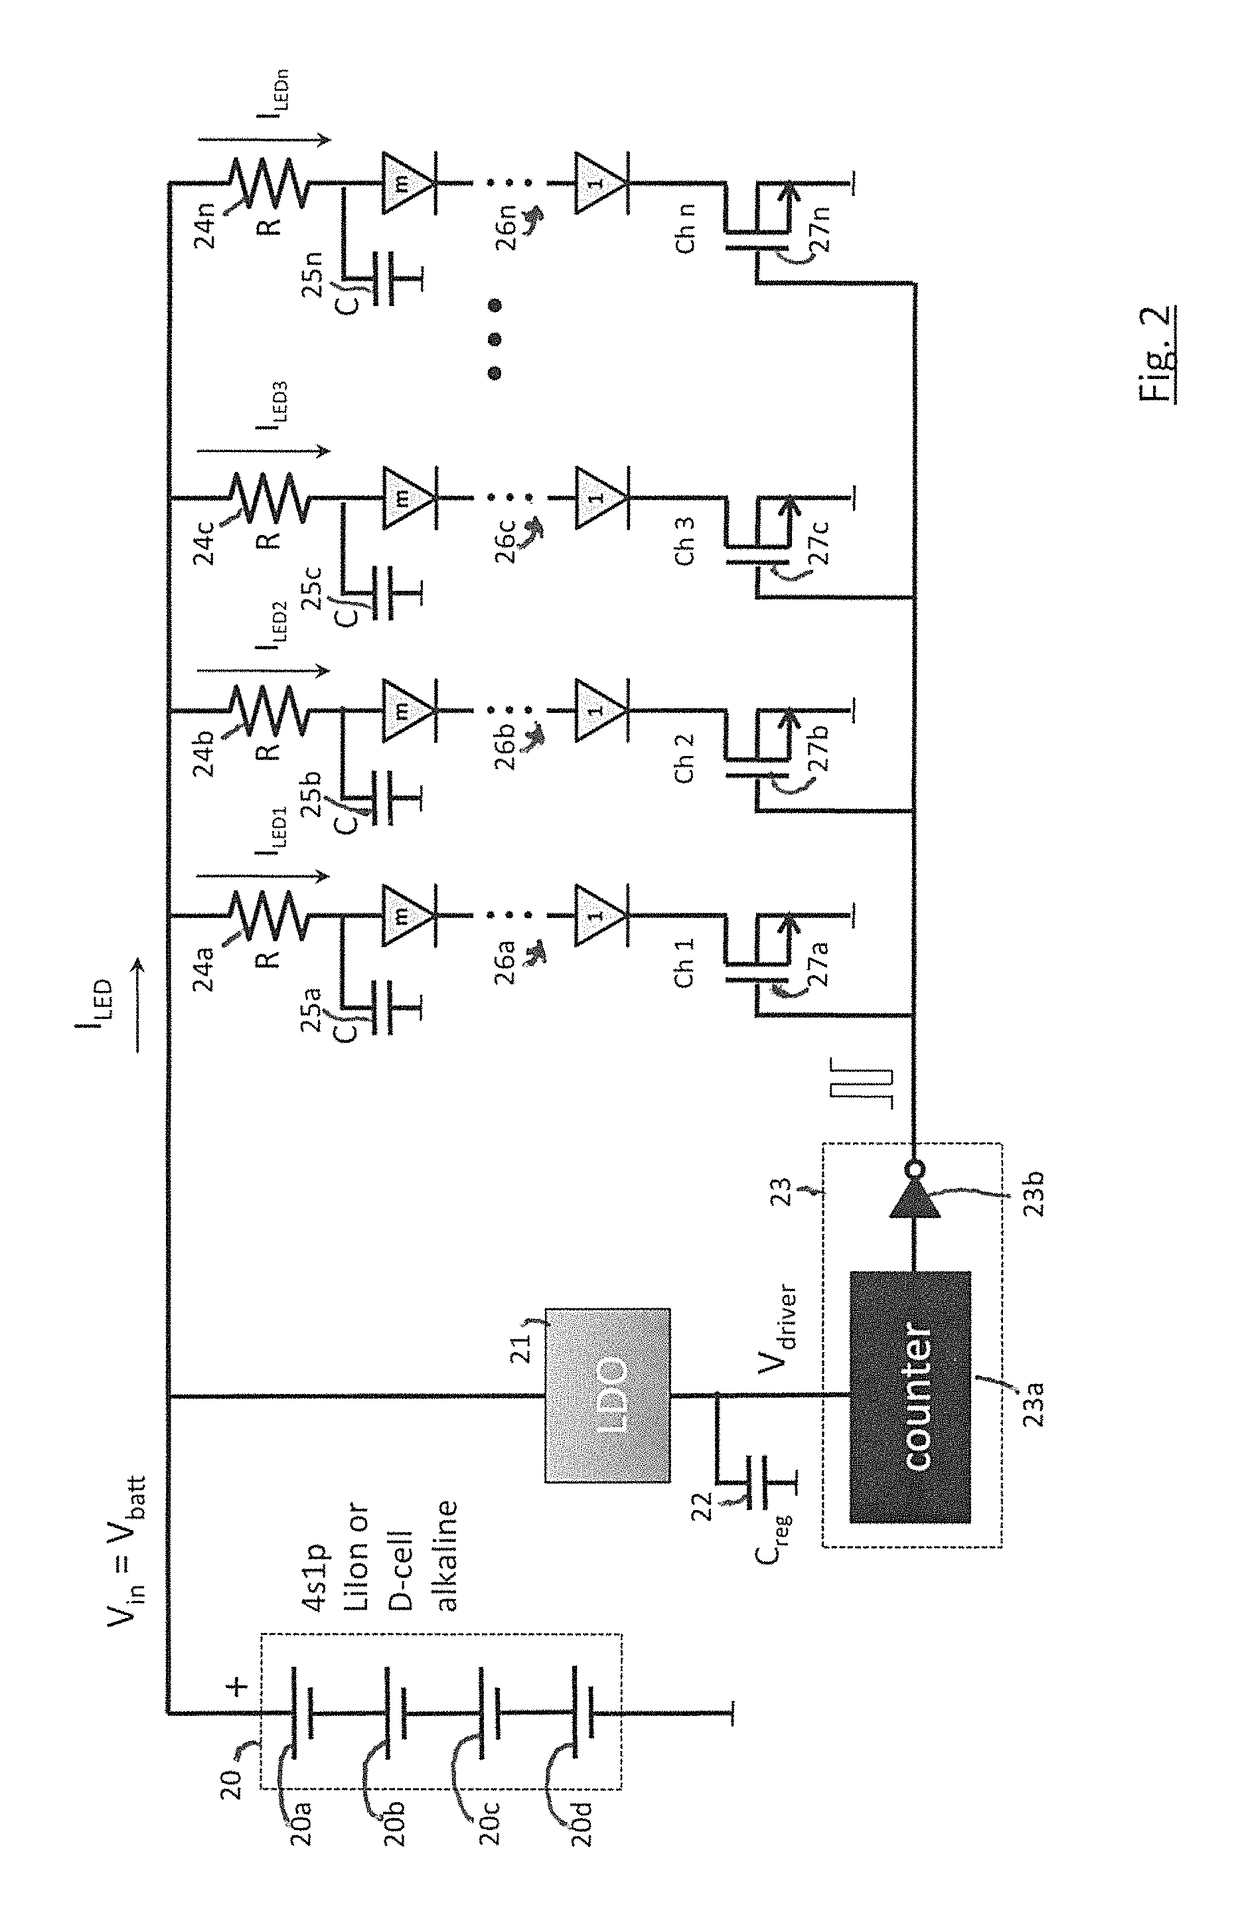 Phototherapy system and process including dynamic LED driver with programmable waveform